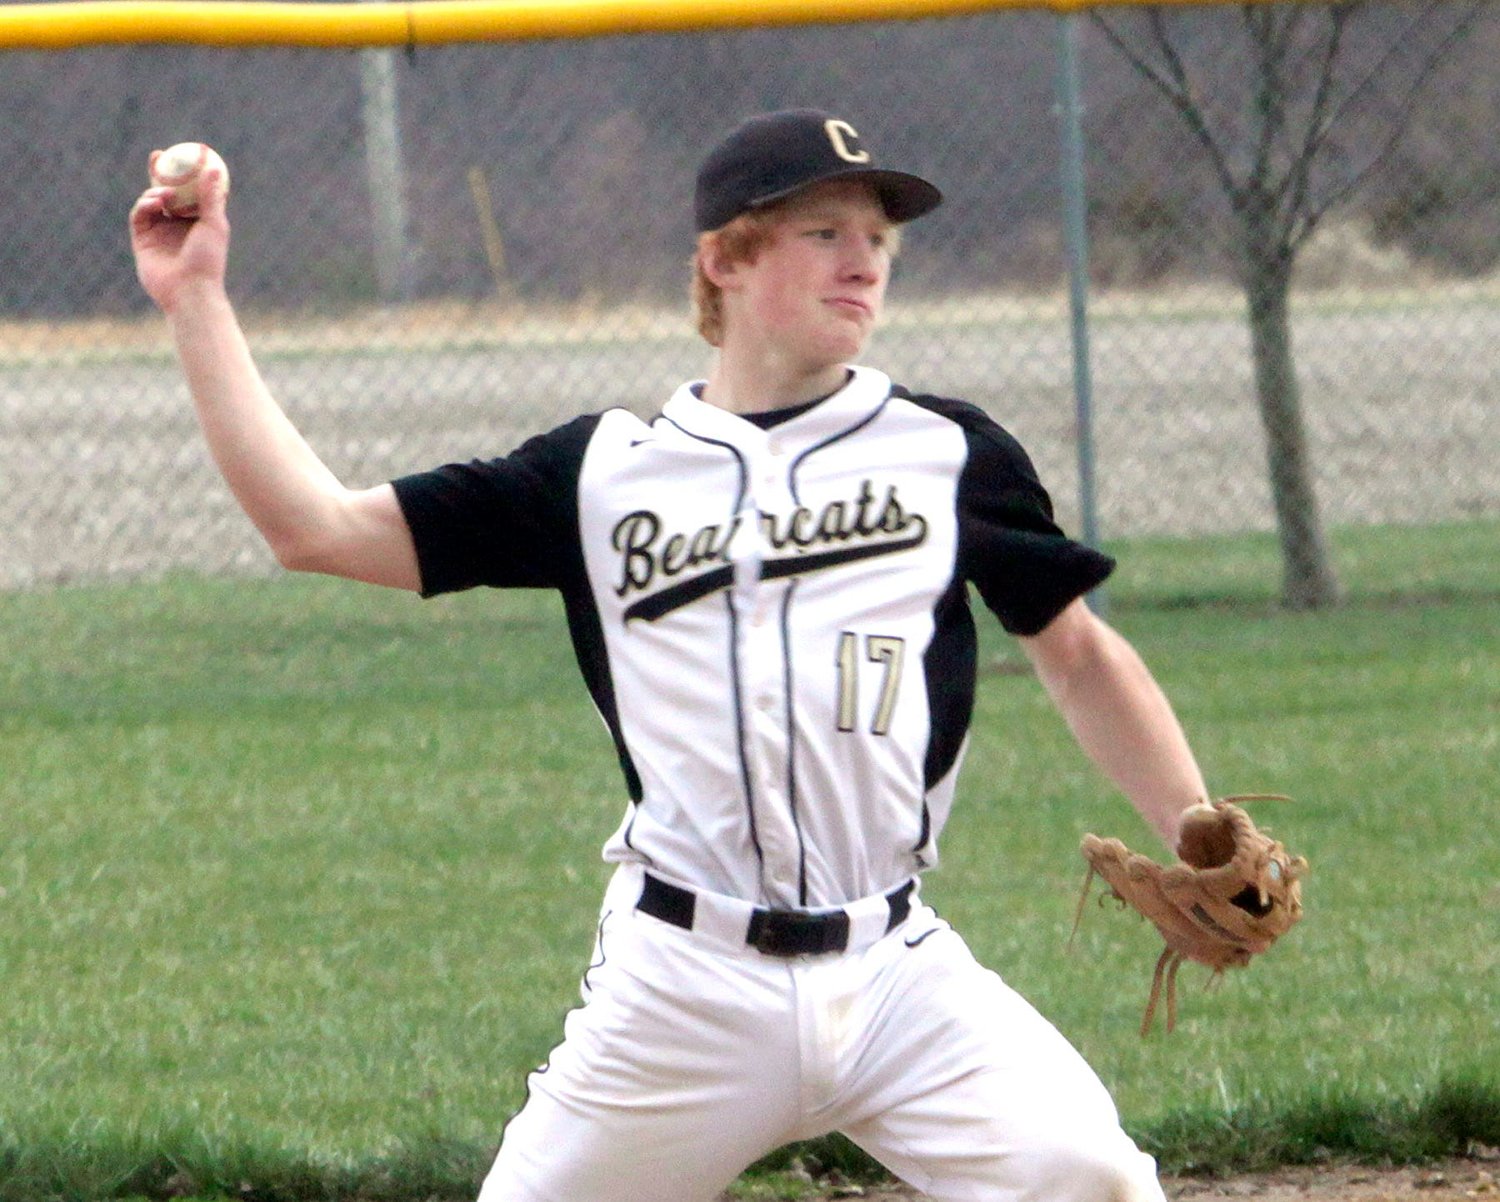 Cairo third baseman Logan Hughes executes a throw across the ball diamond to first base. Hughes and the Bearcats baseball team improved its season record to 4-0 Tuesday after defeating New Franklin 2-0 at home.